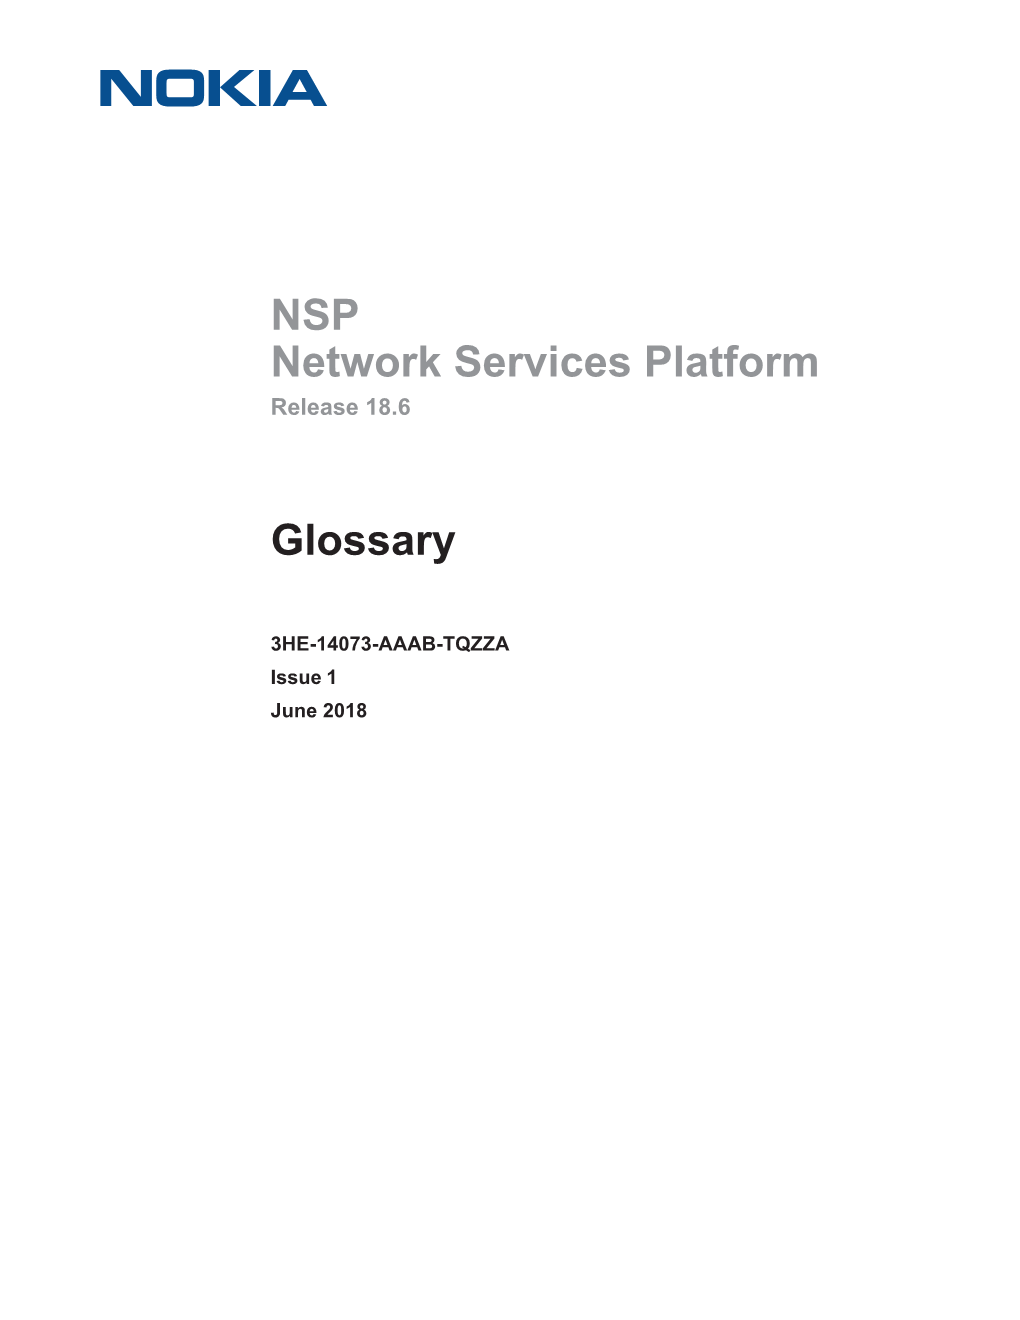 NSP Network Services Platform Release 18.6 Glossary